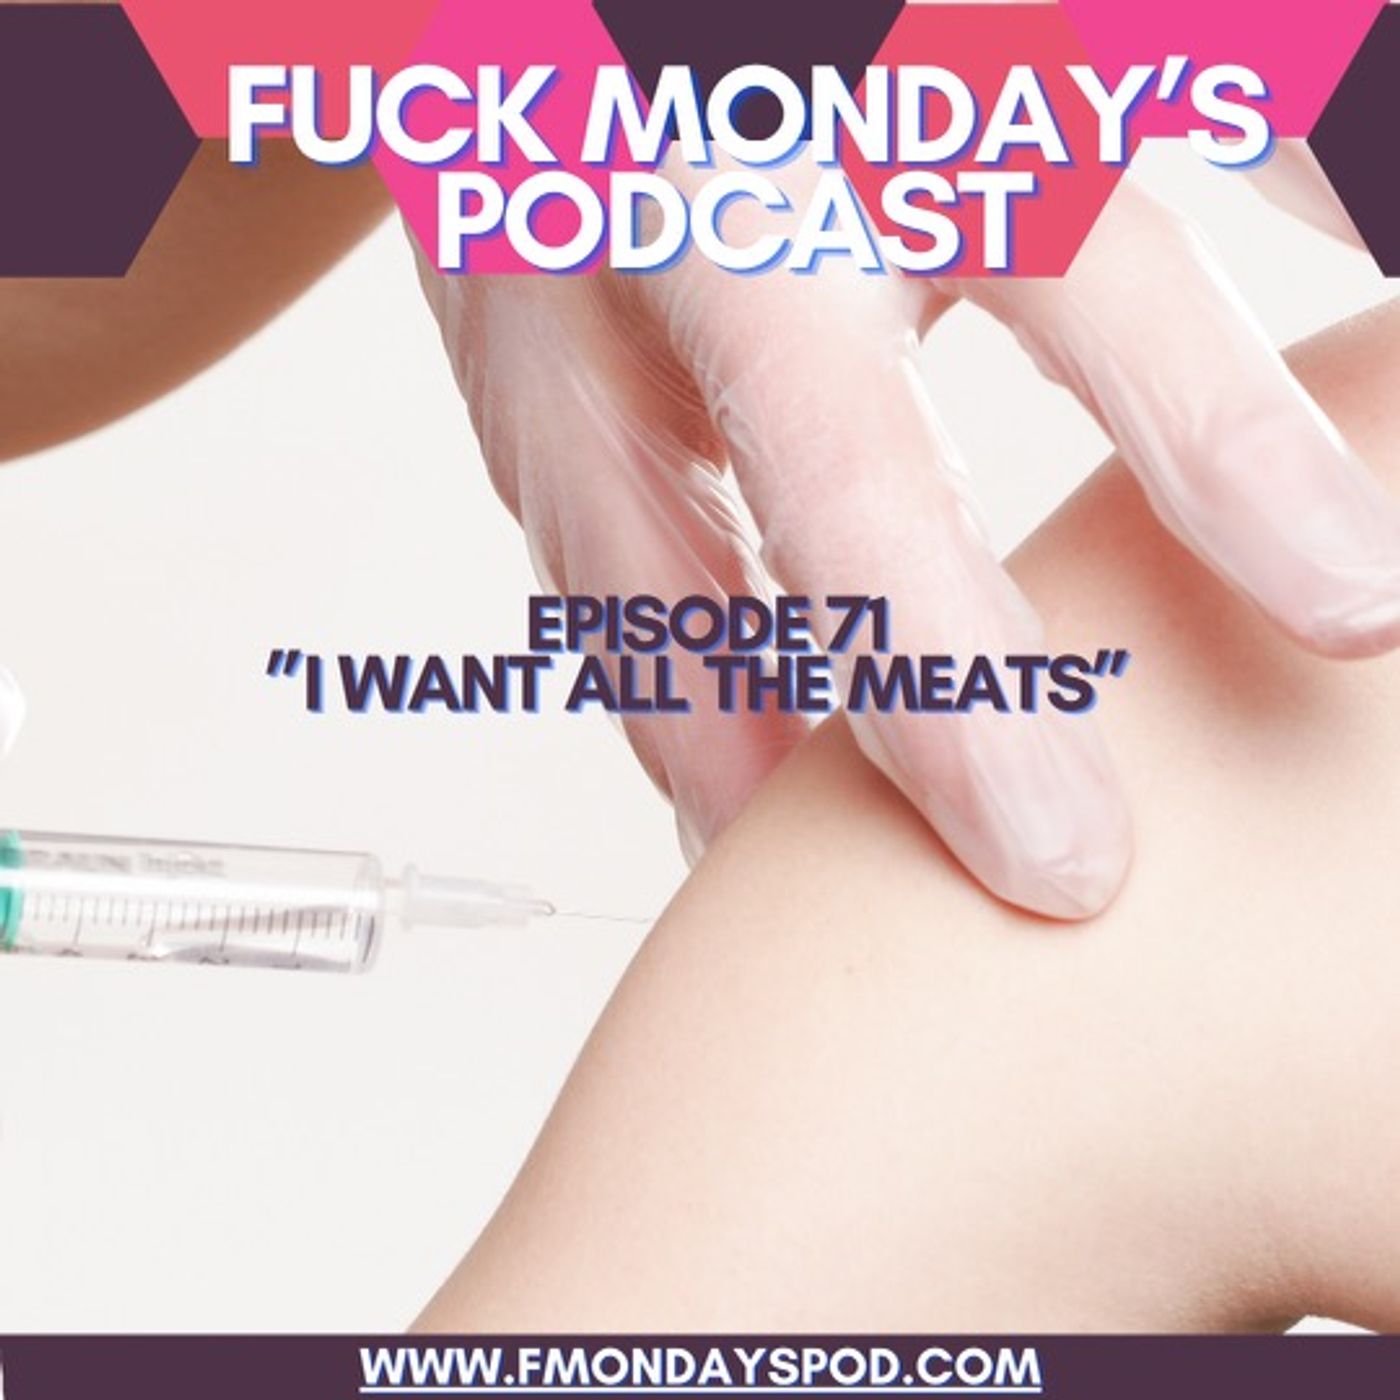 Episode 71- I WANT ALL THE MEATS